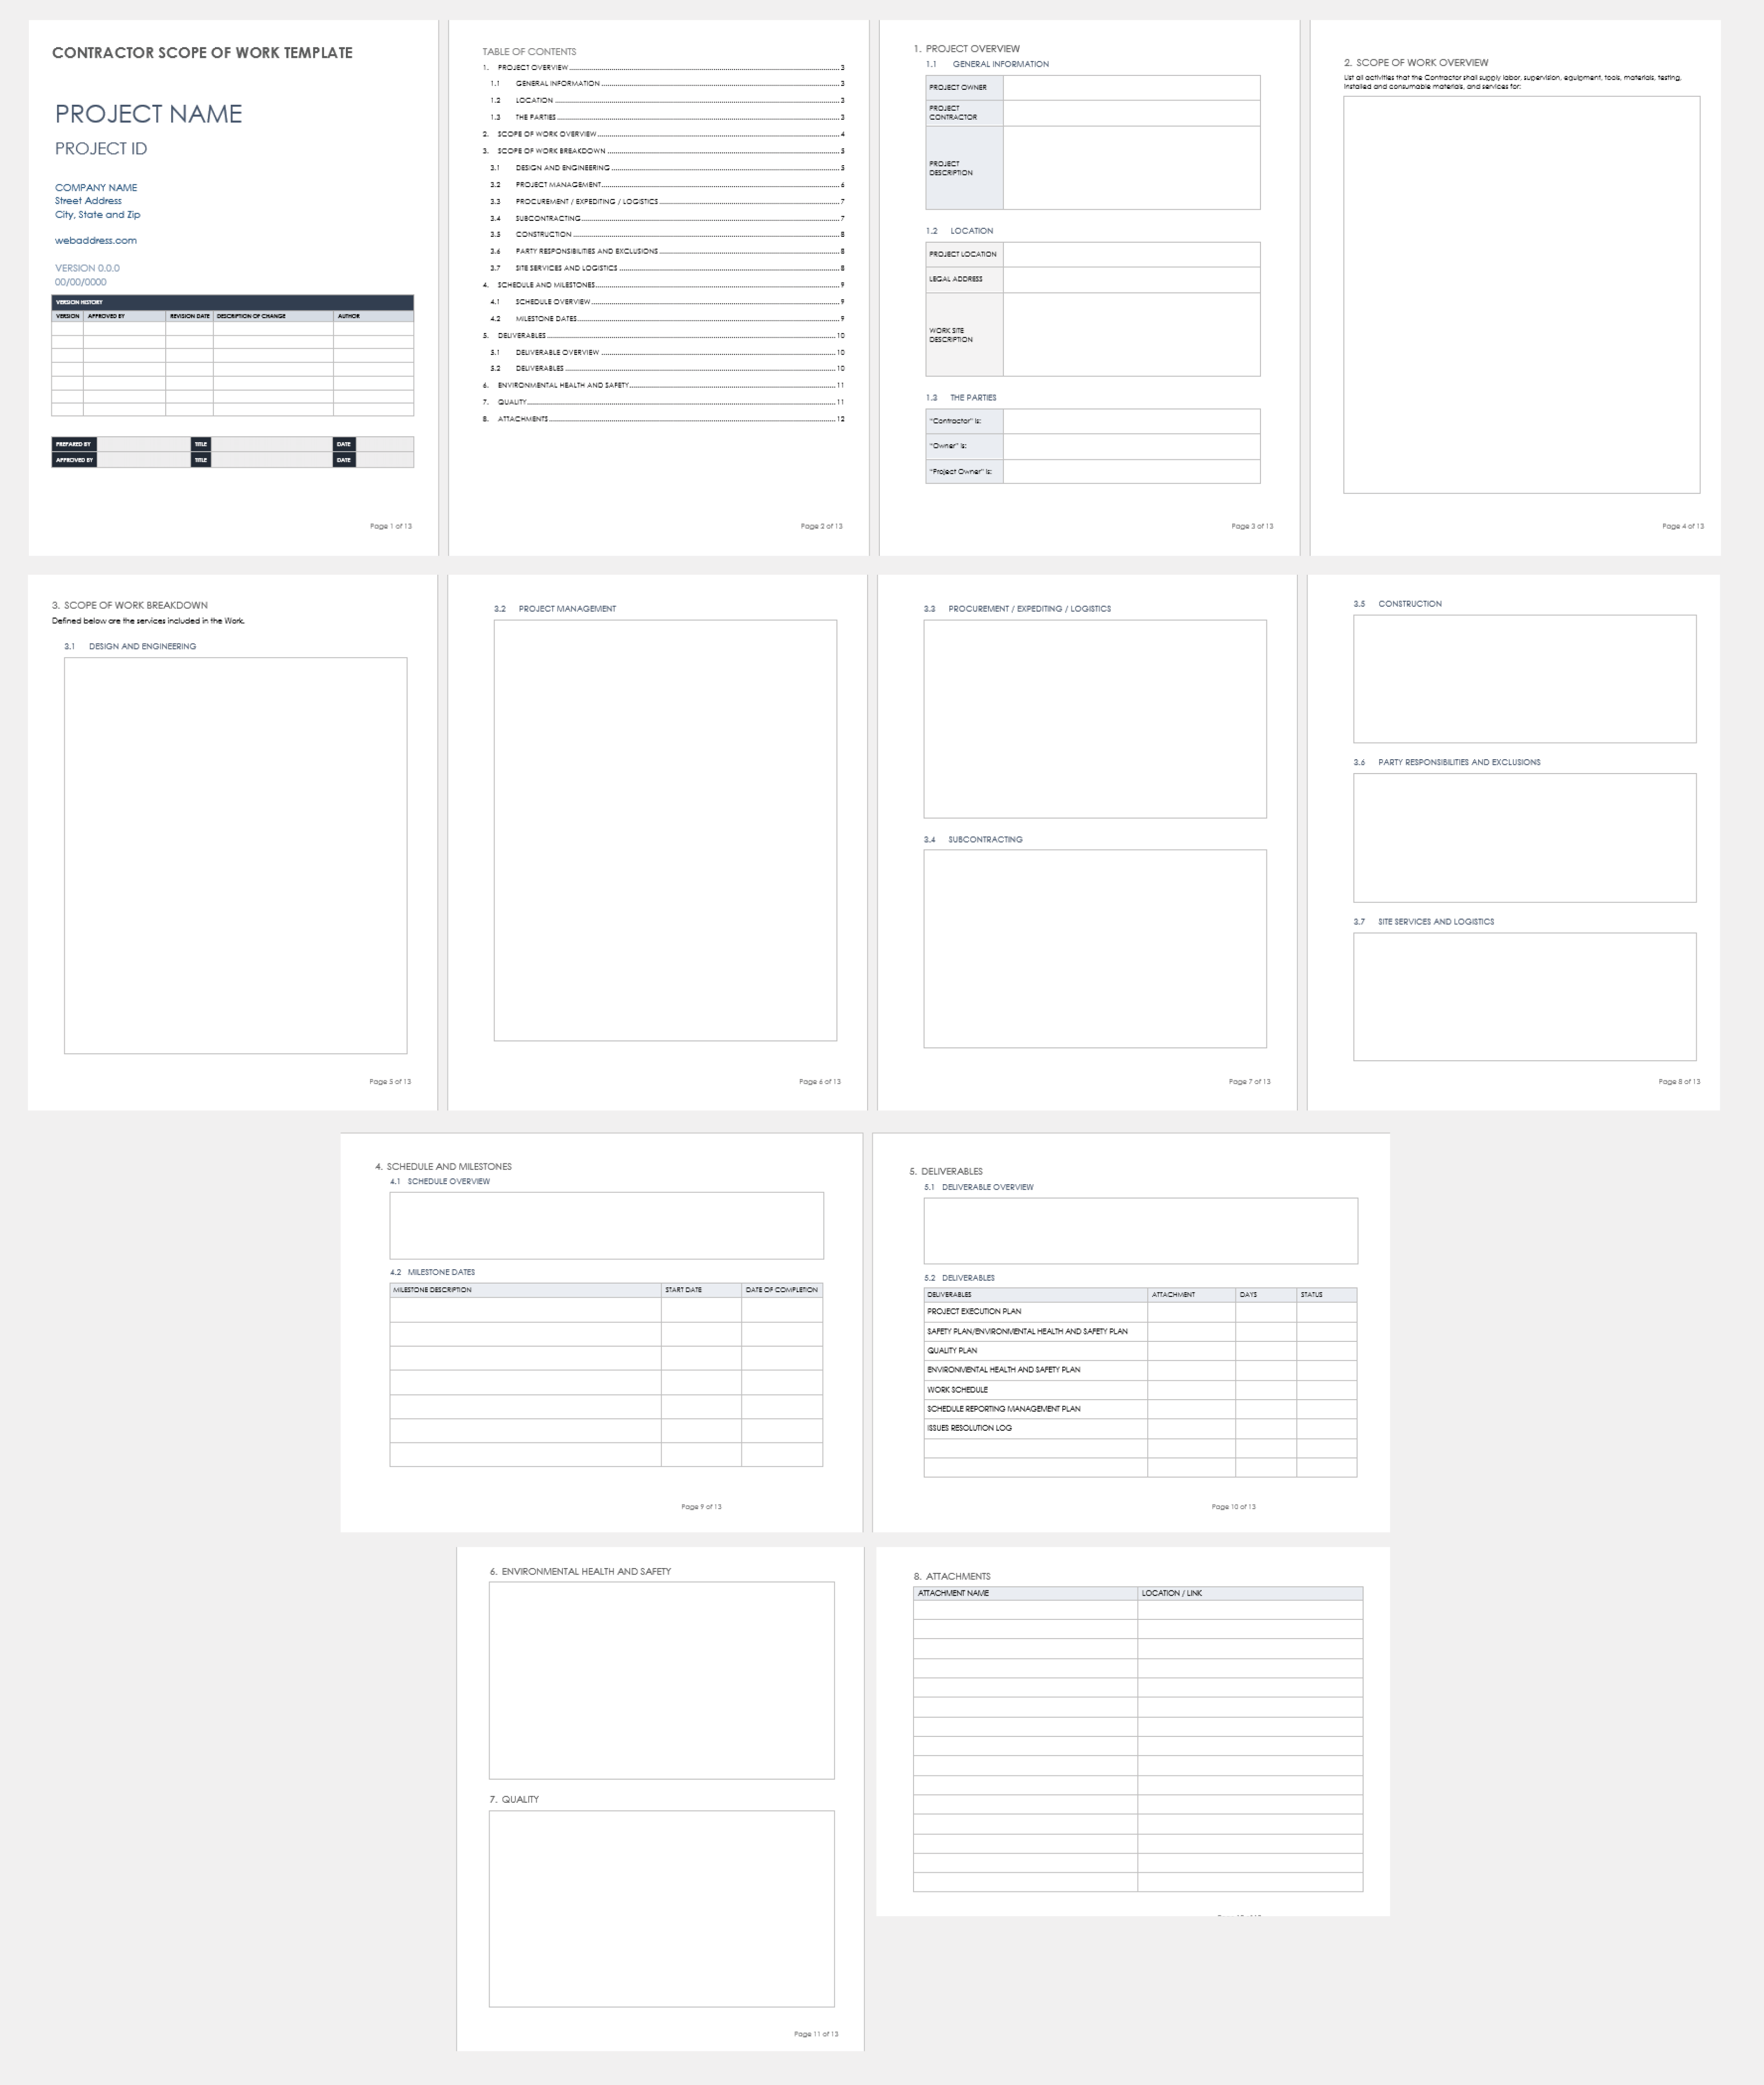 scope of work excel template